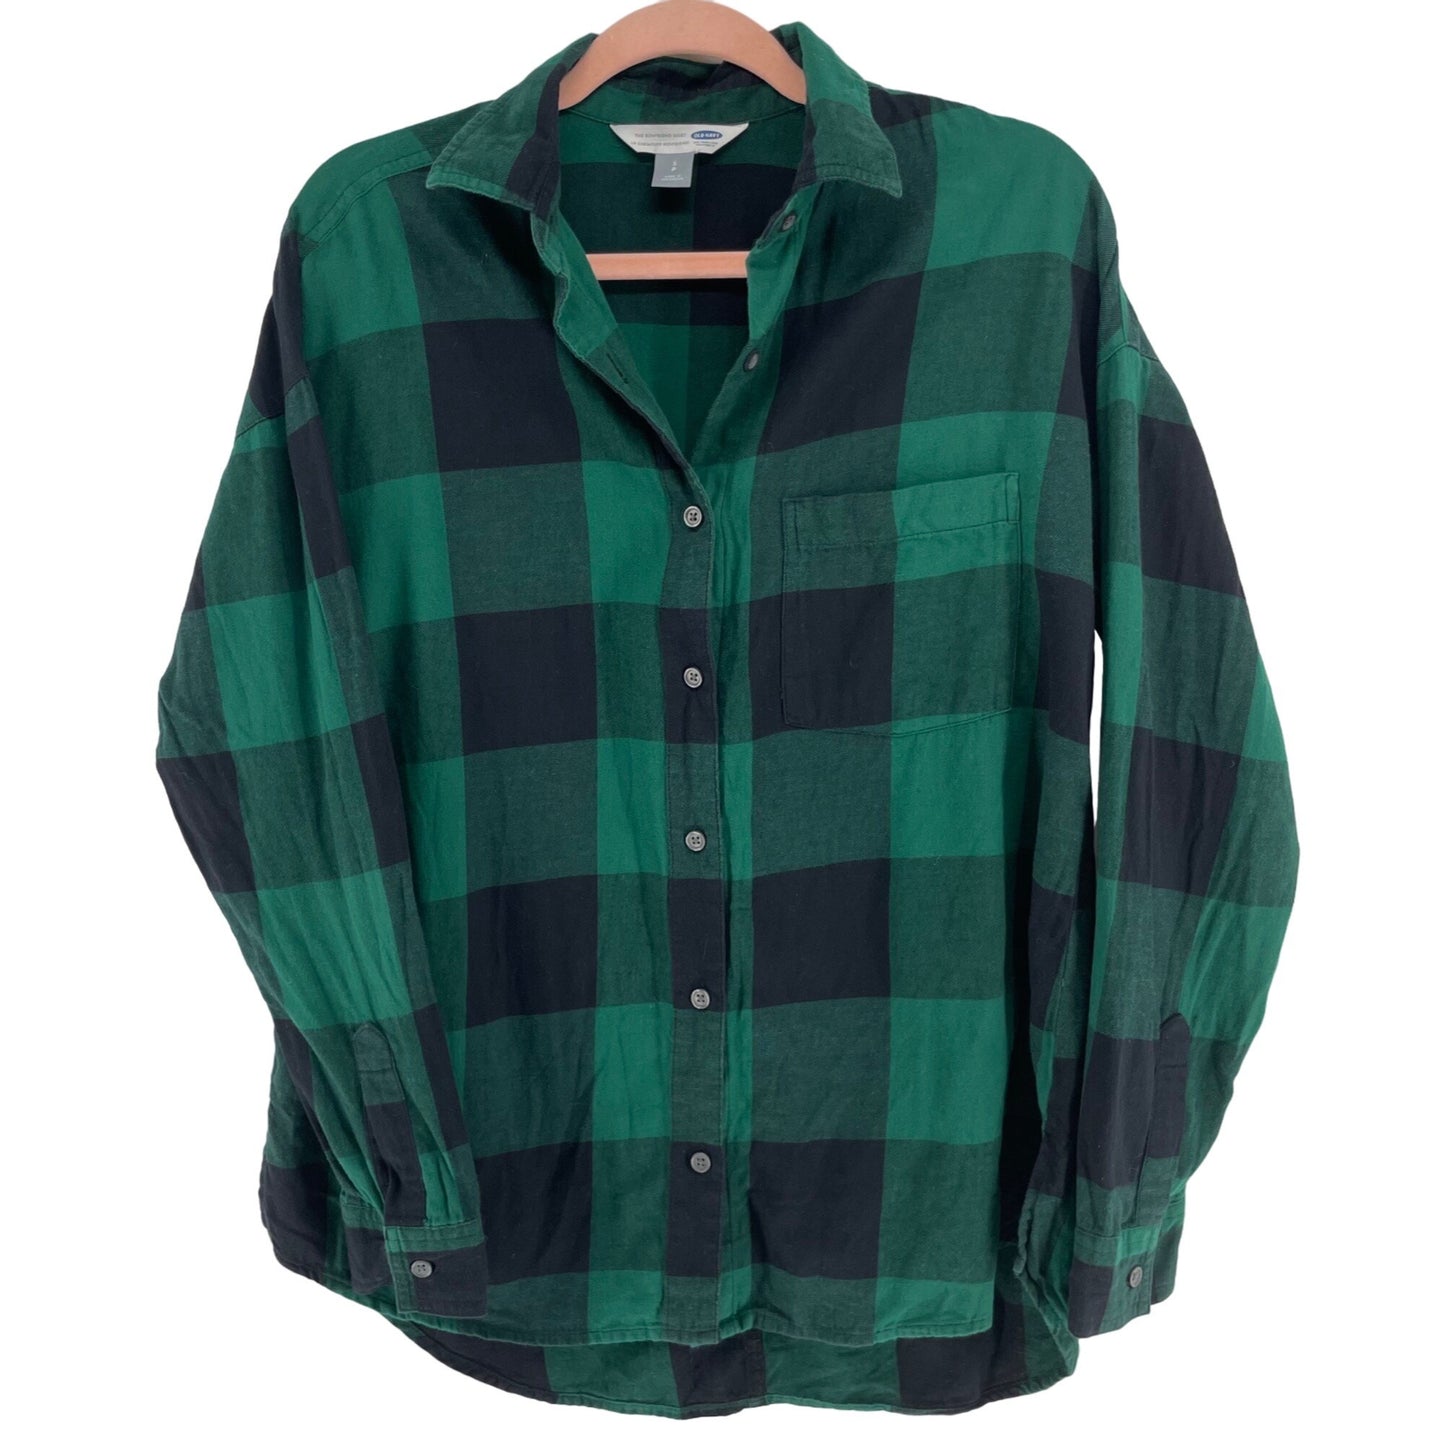 Old Navy Men's Size Small Forest Green & Black Plaid Button-Down Flannel Shirt